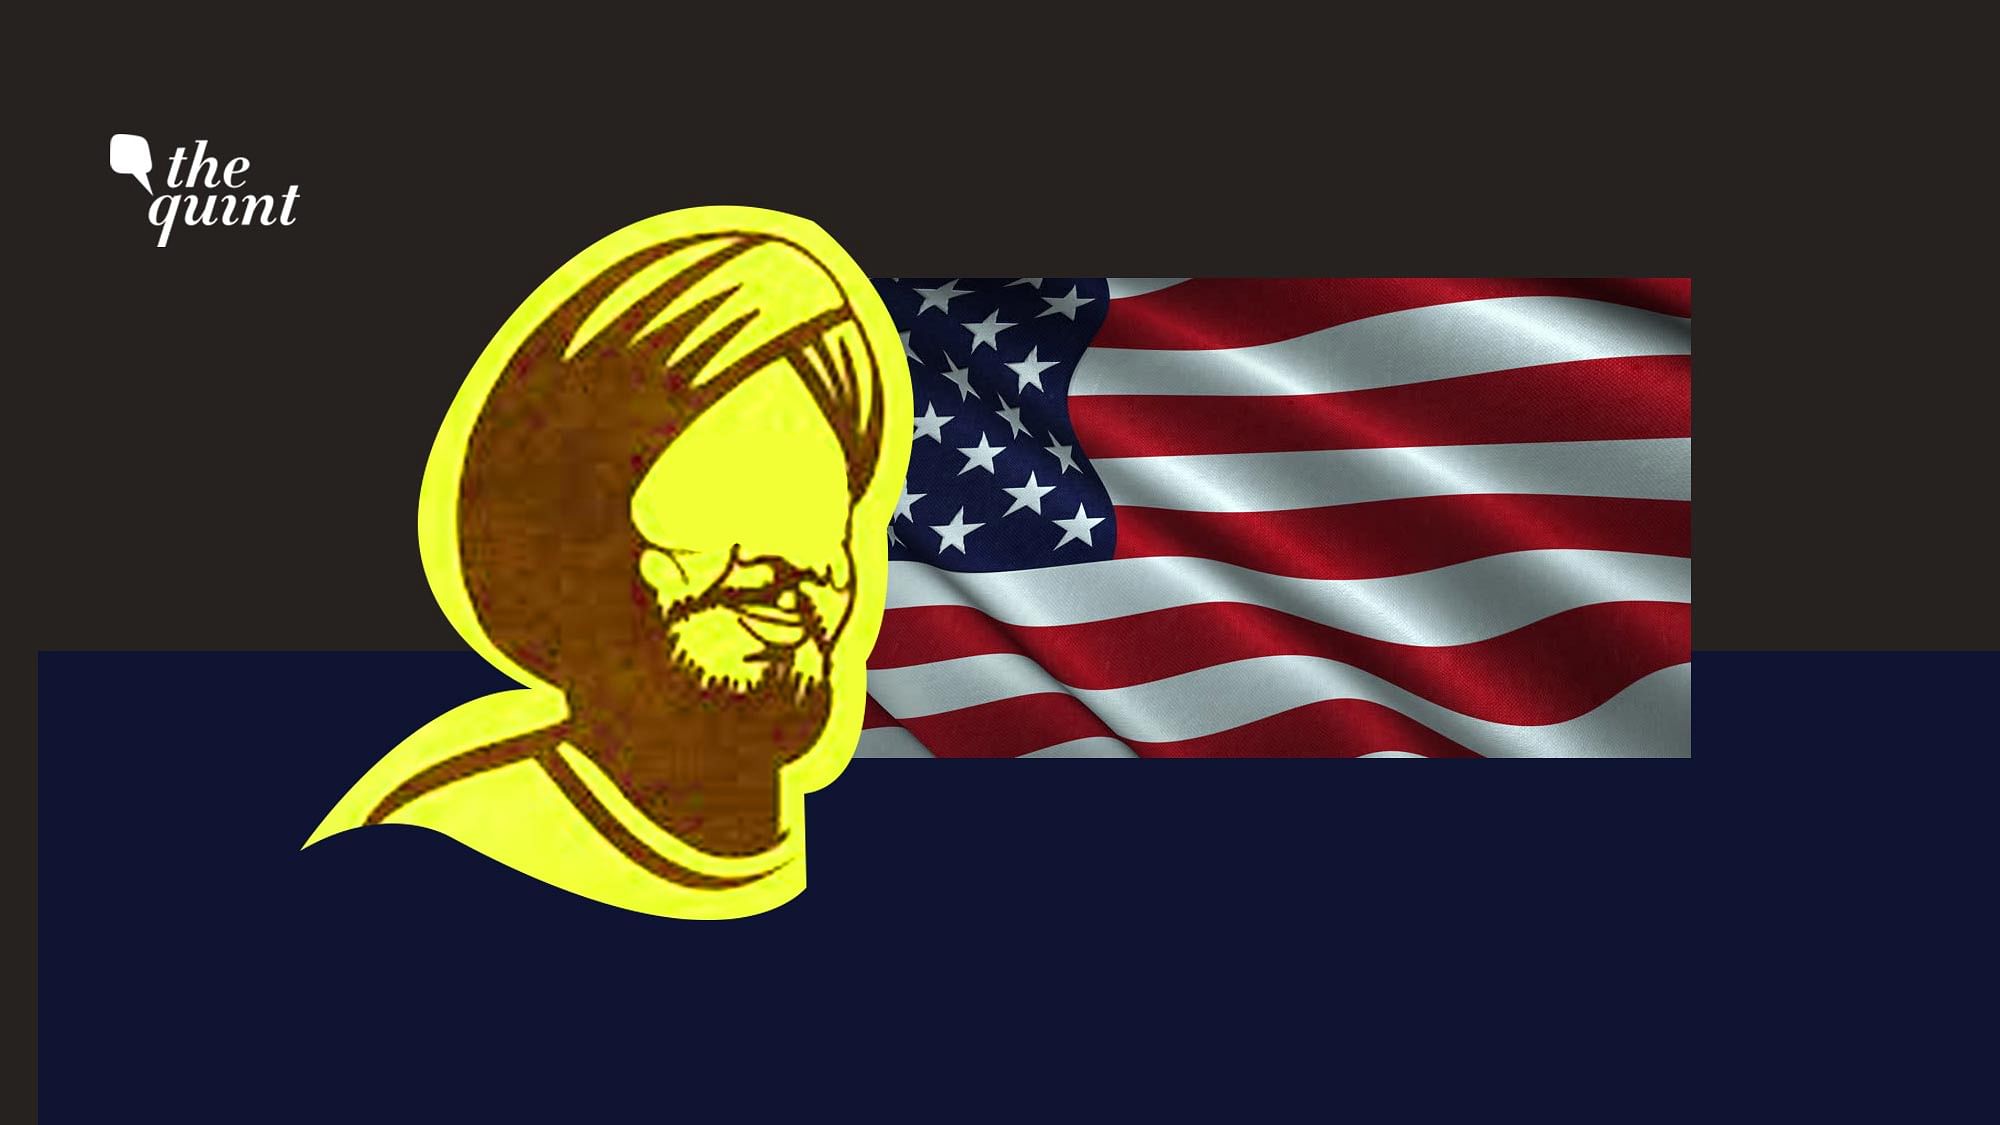 Image of a Sikh person and the American flag used for representational purposes.